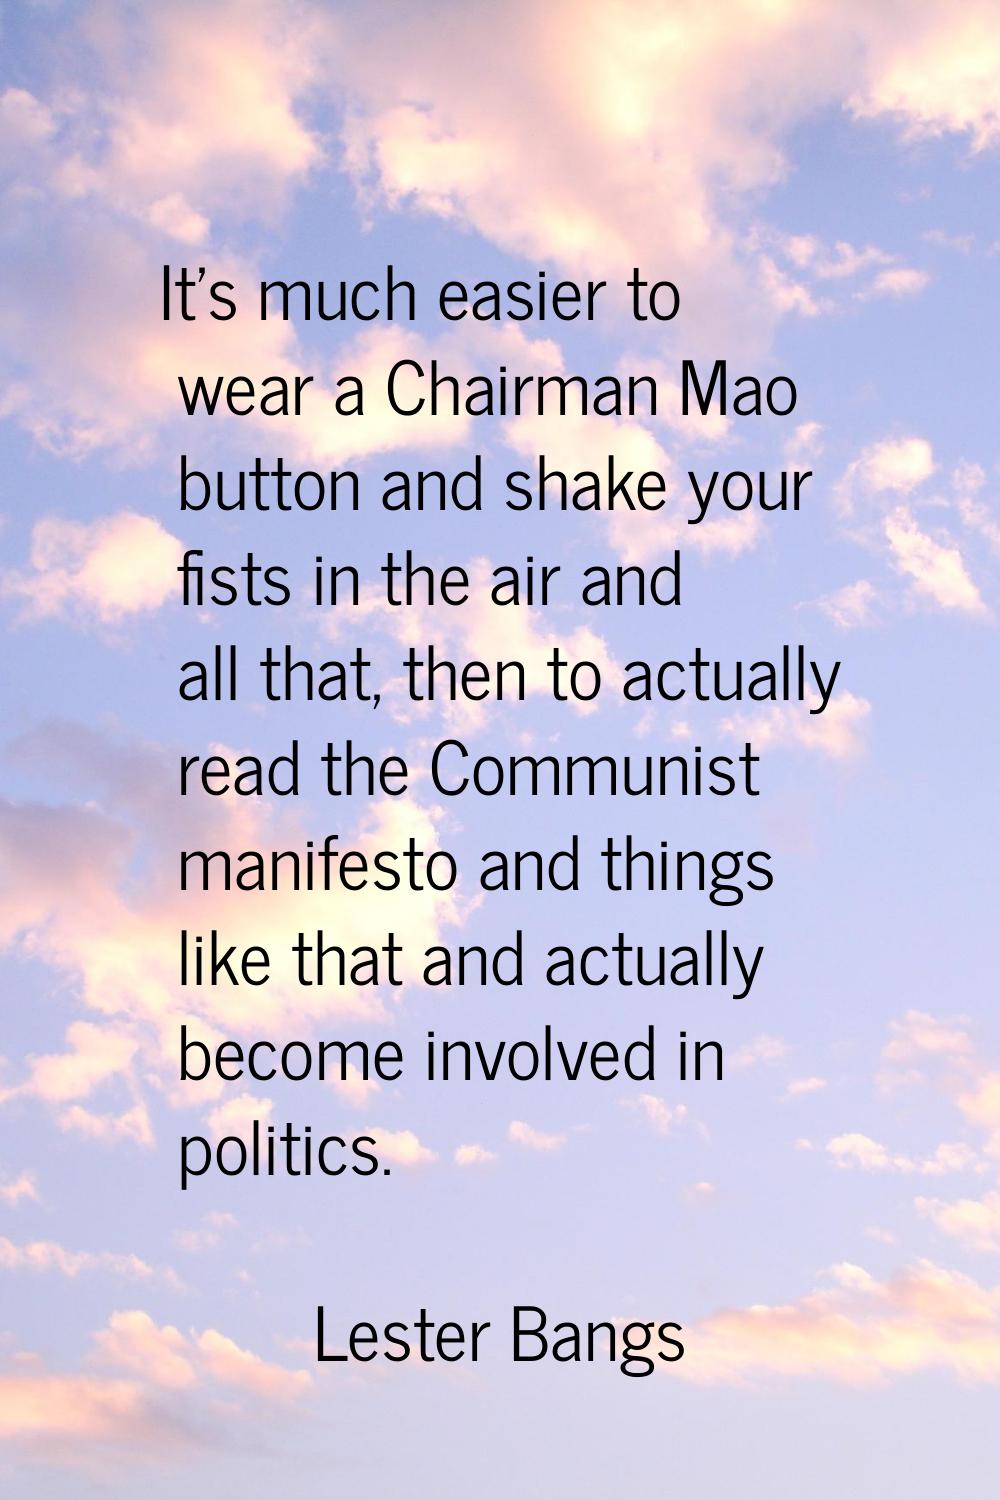 It's much easier to wear a Chairman Mao button and shake your fists in the air and all that, then t